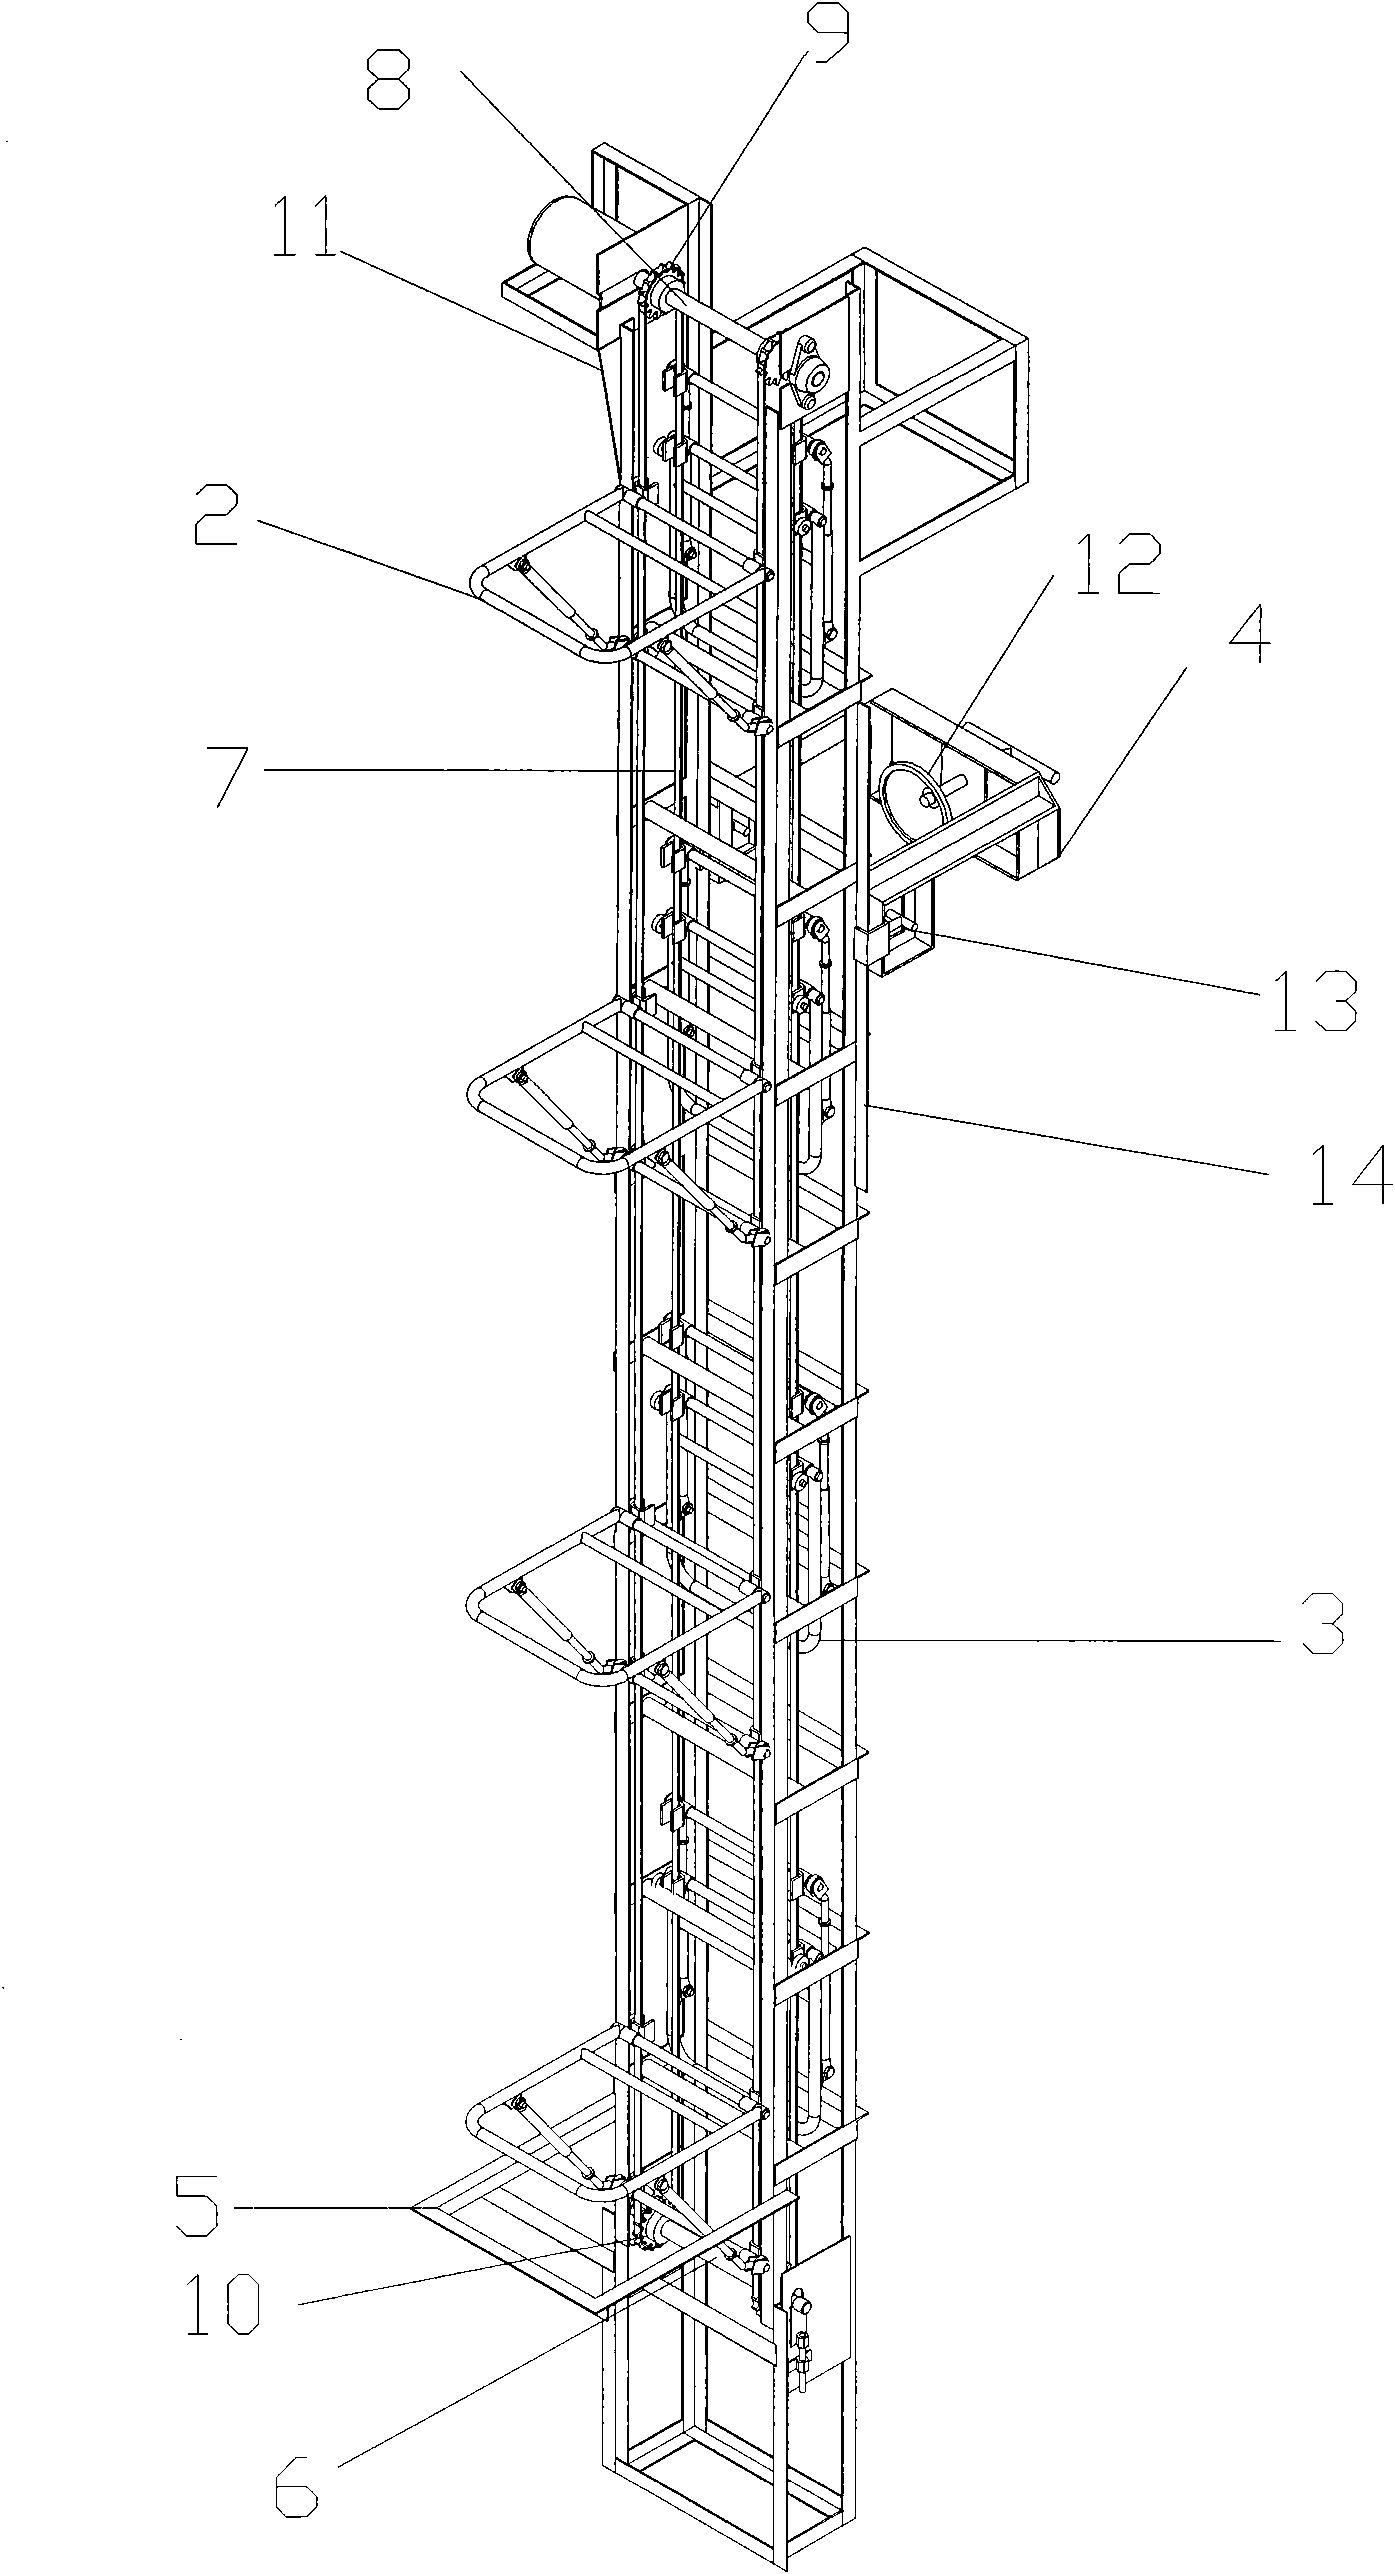 Semi-automatic bottom sowing device